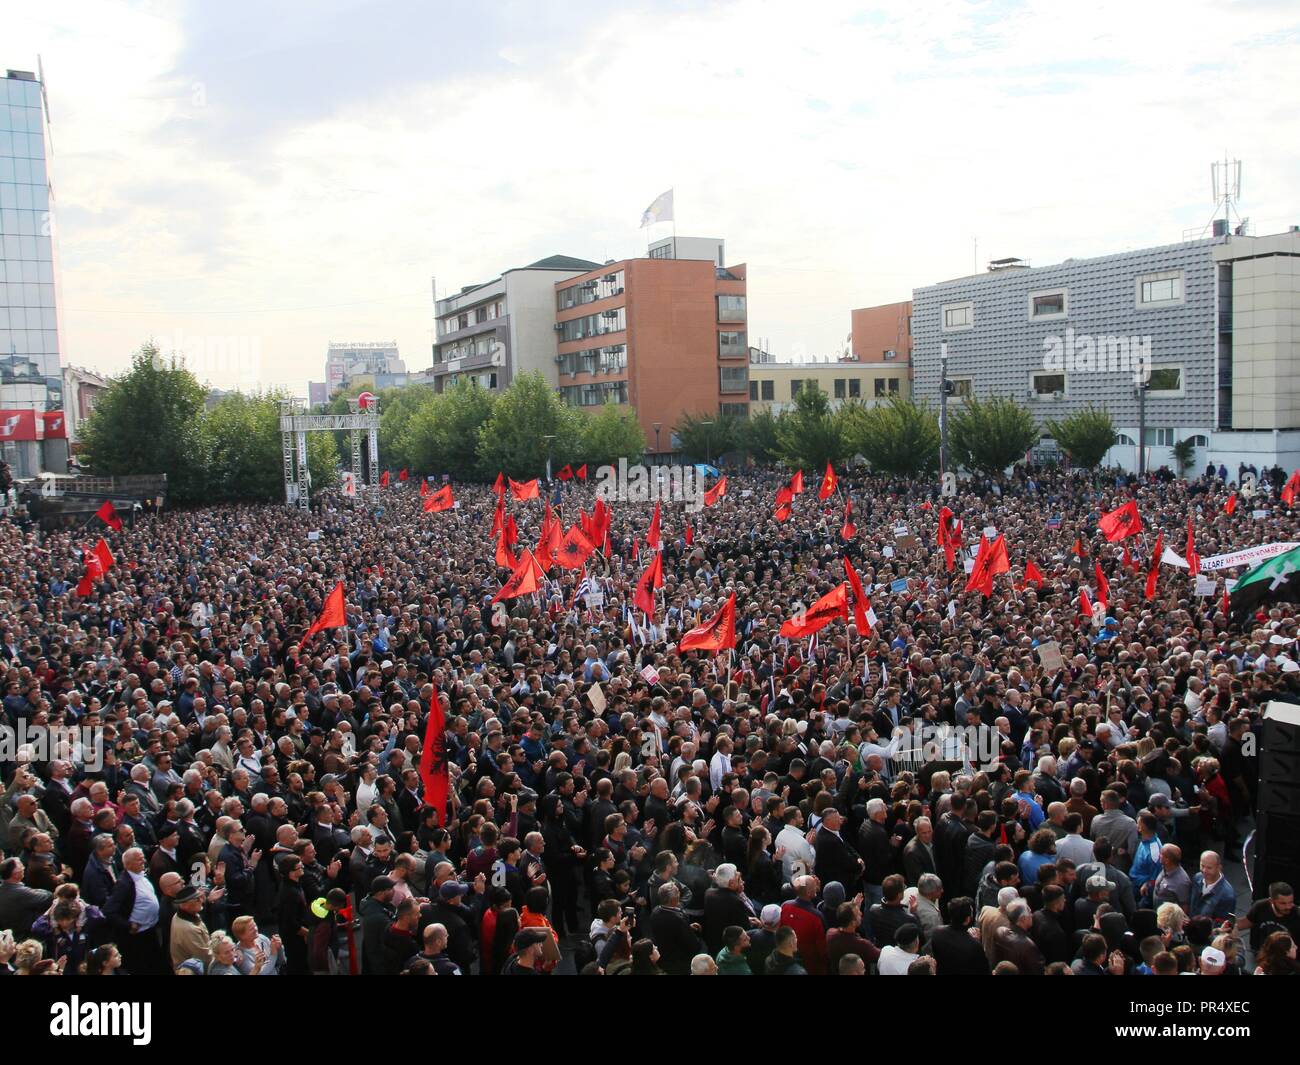 Pristina, Kosovo. 29th September 2018. Thousands of protesters gather in  Skanderbeg Square, Pristina, Kosovo, to demonstrate against land swaps with  Serbia proposed by President Hashim Thaci. The protest was organised by the